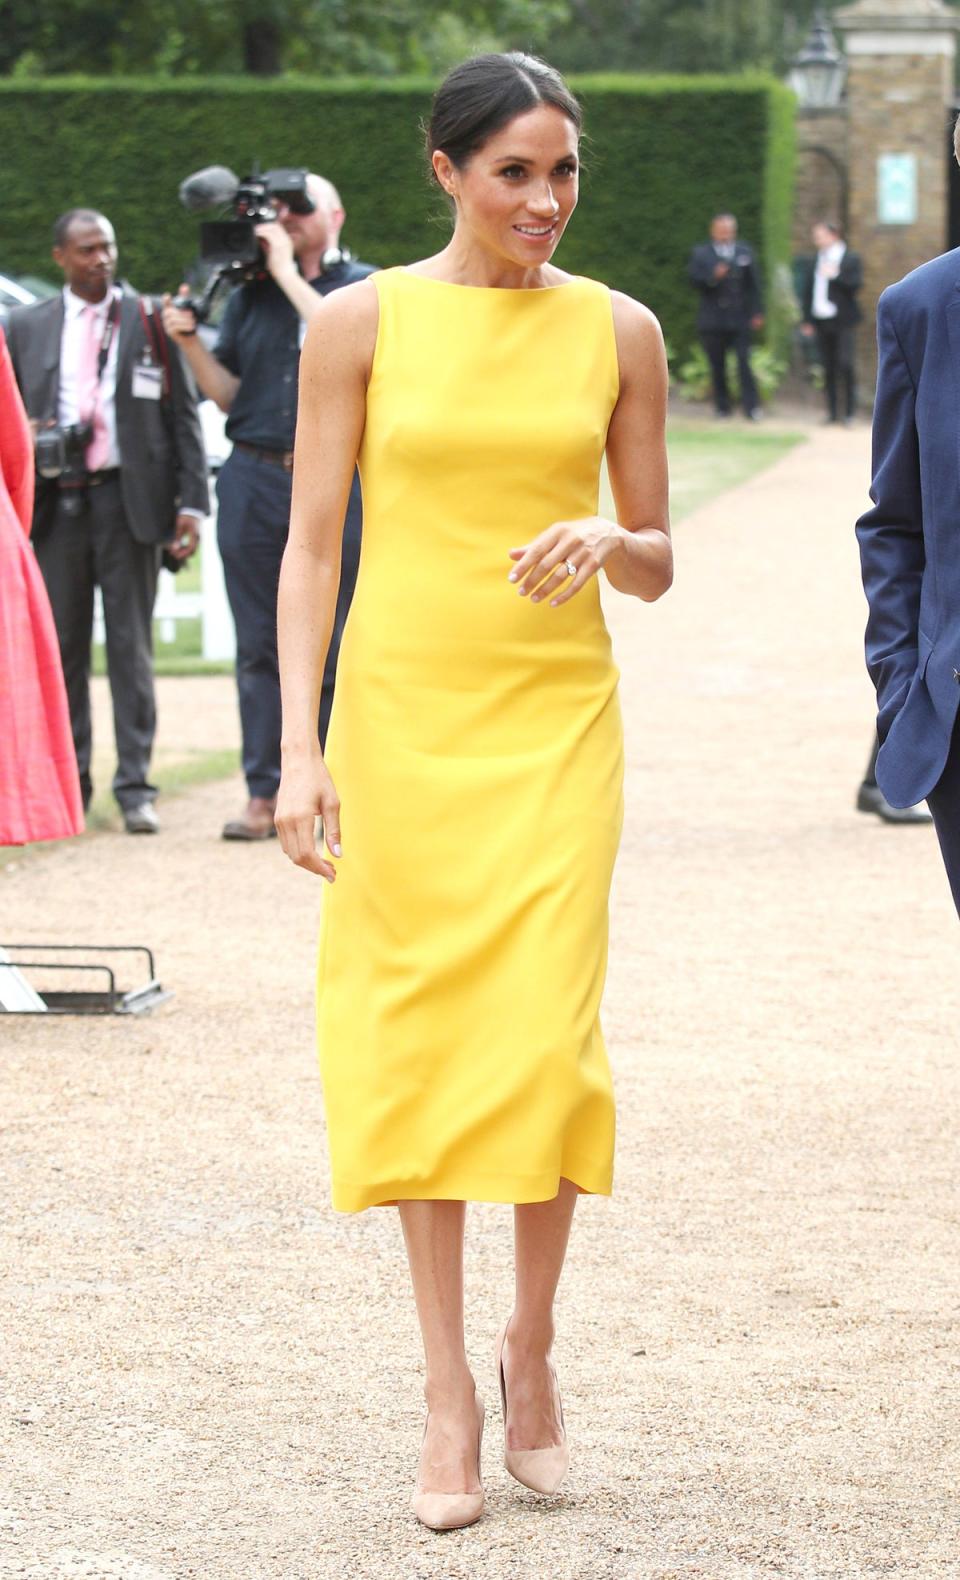 Meghan chose a vibrant yellow outfit. (Getty Images)